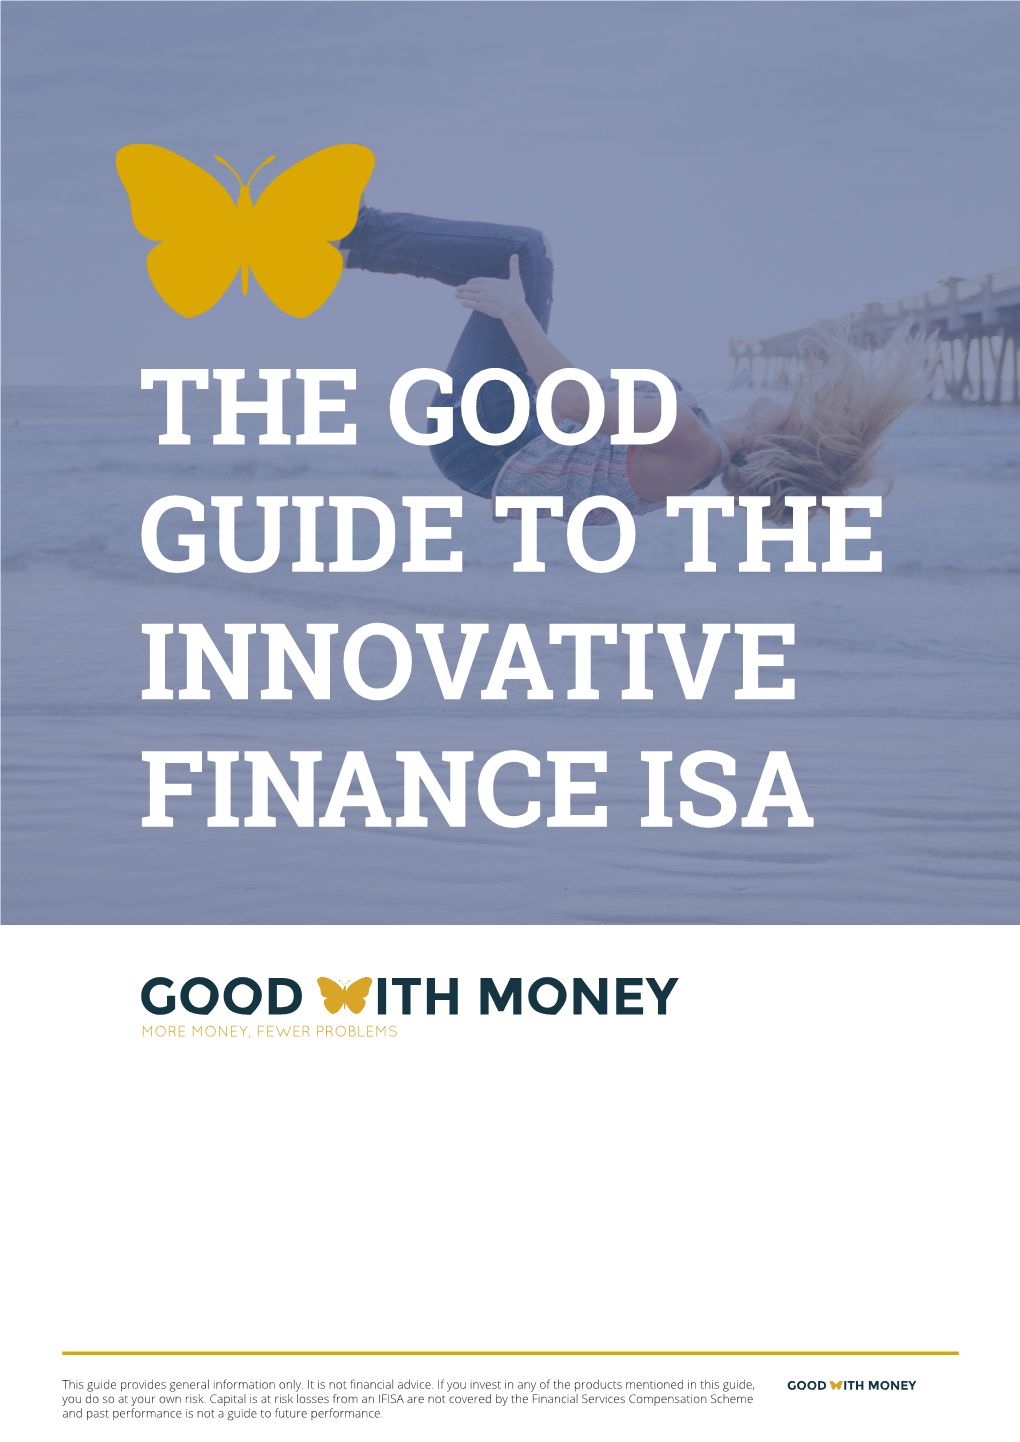 The Good Guide to the Innovative Finance Isa